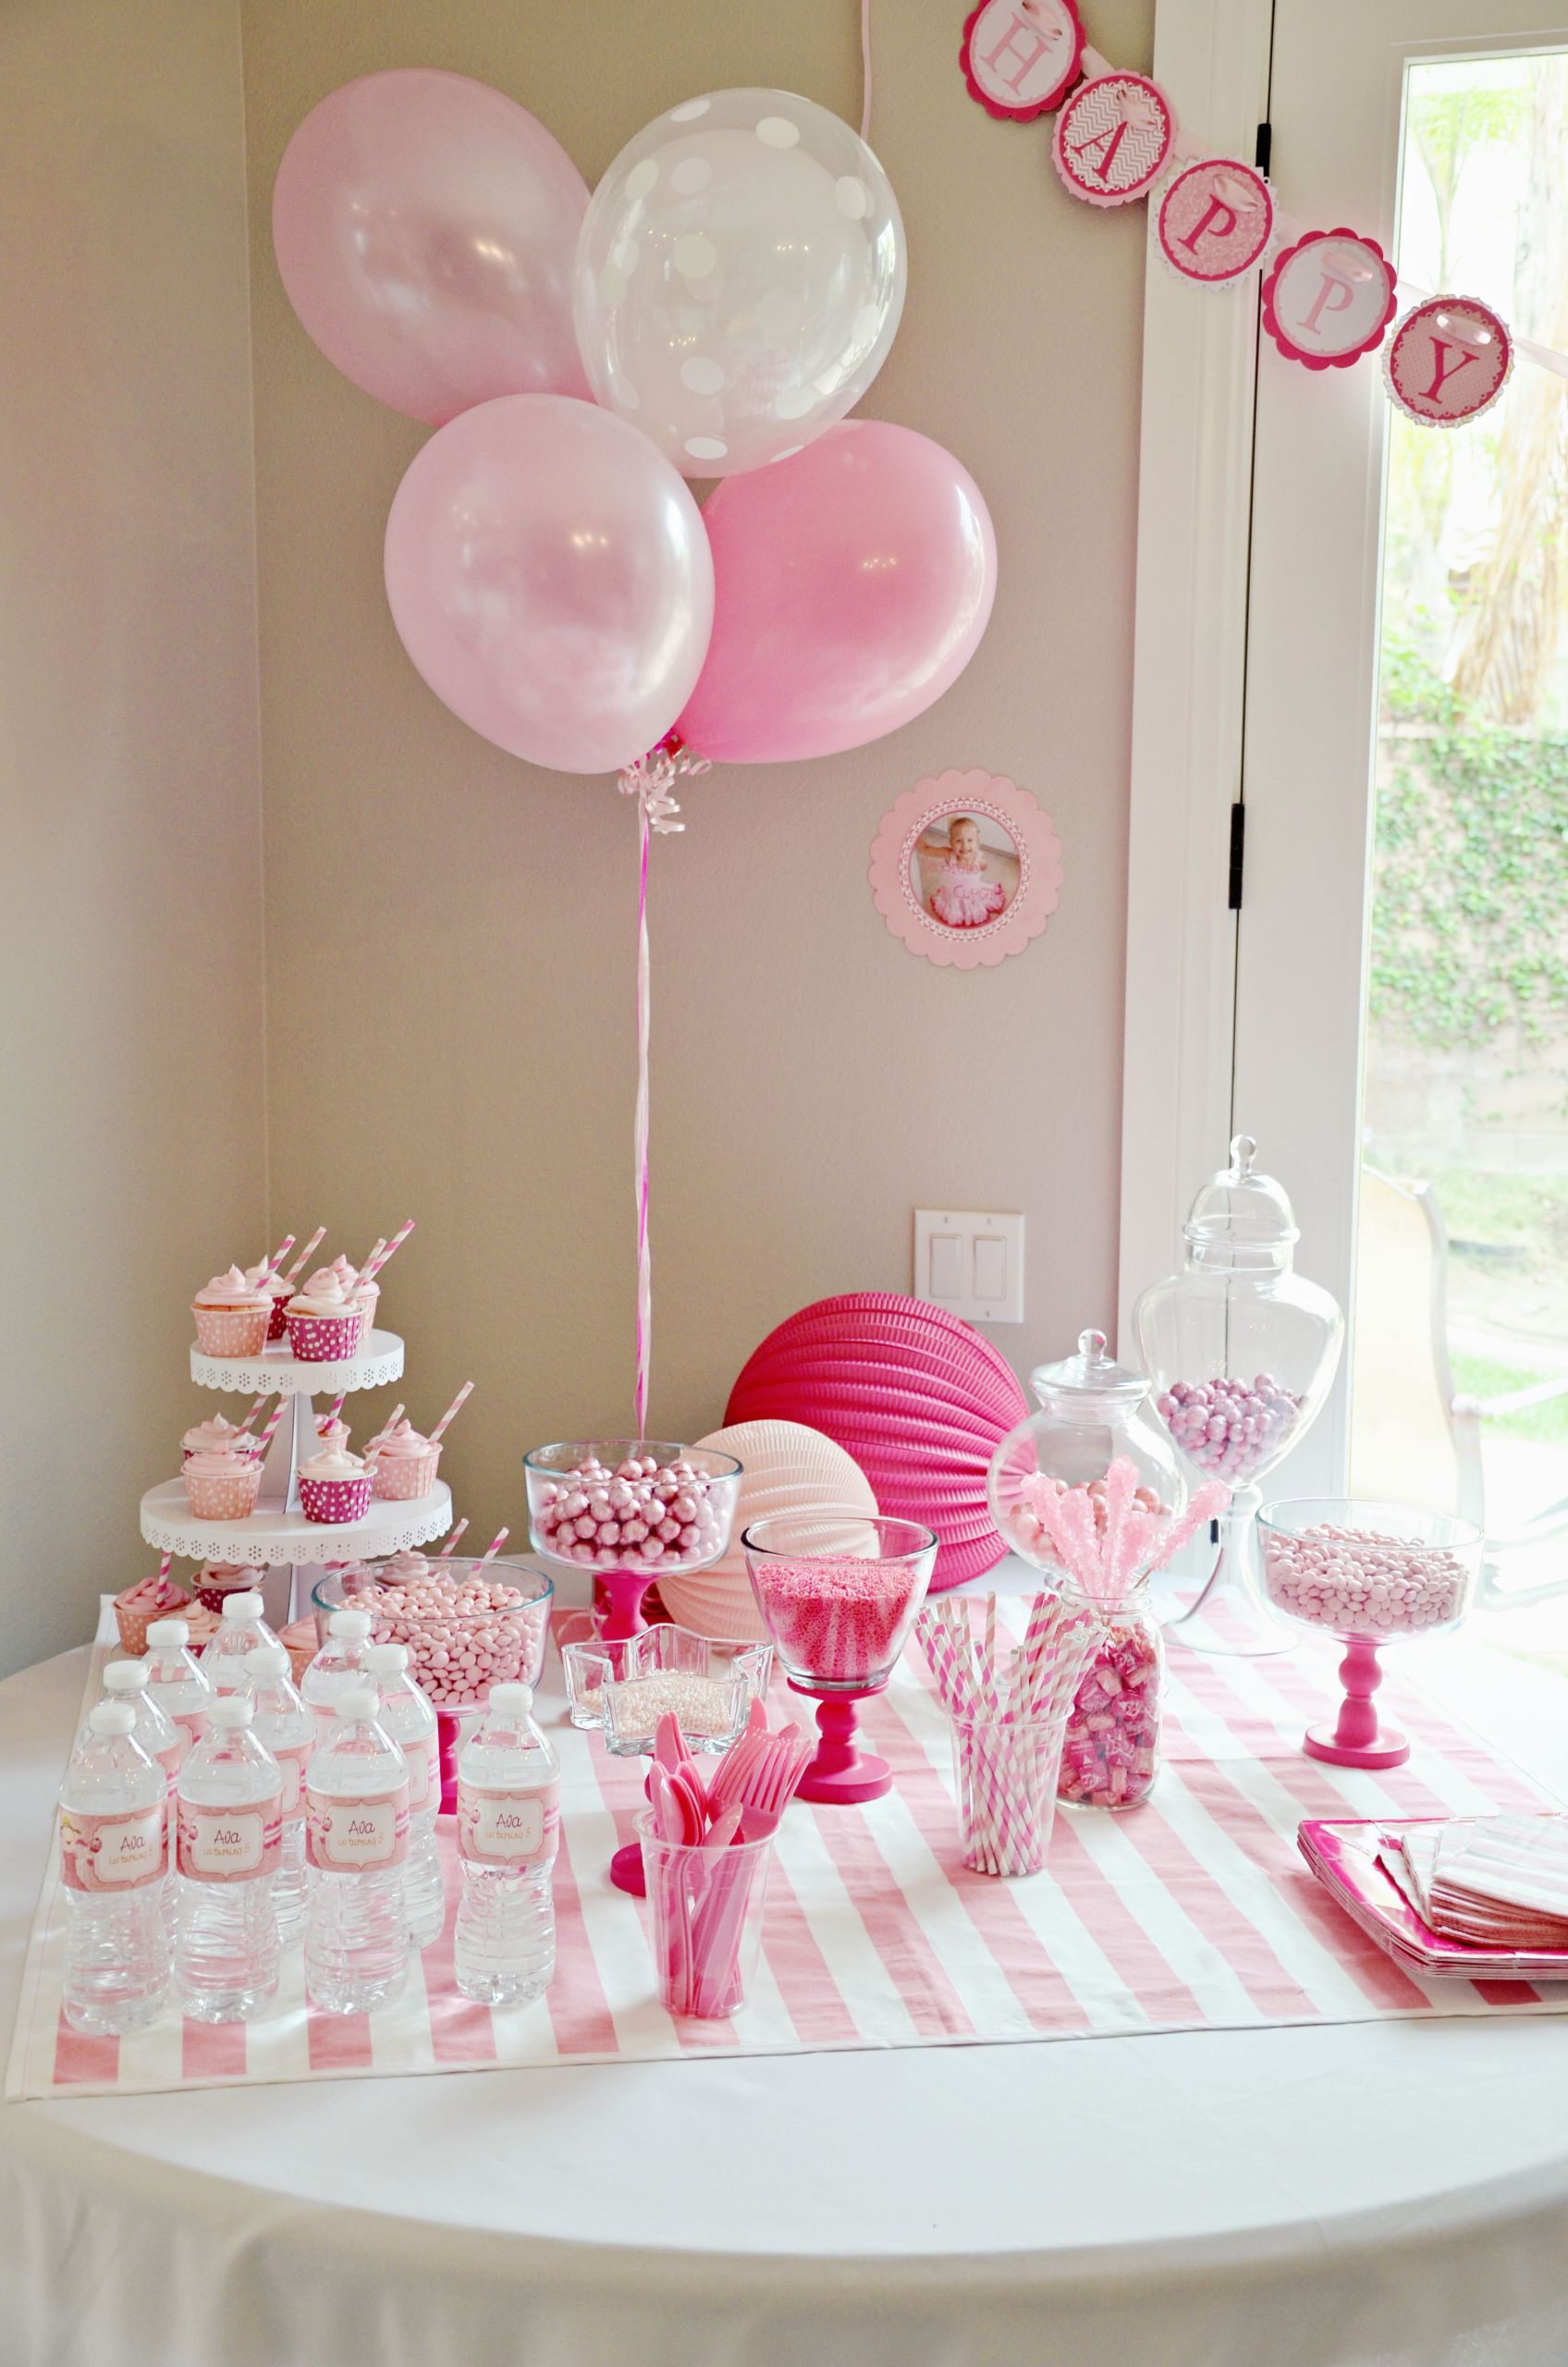 Birthday Party Ideas For 2 Year Old Baby Girl
 A Pinkalicious themed party for a 3 year old